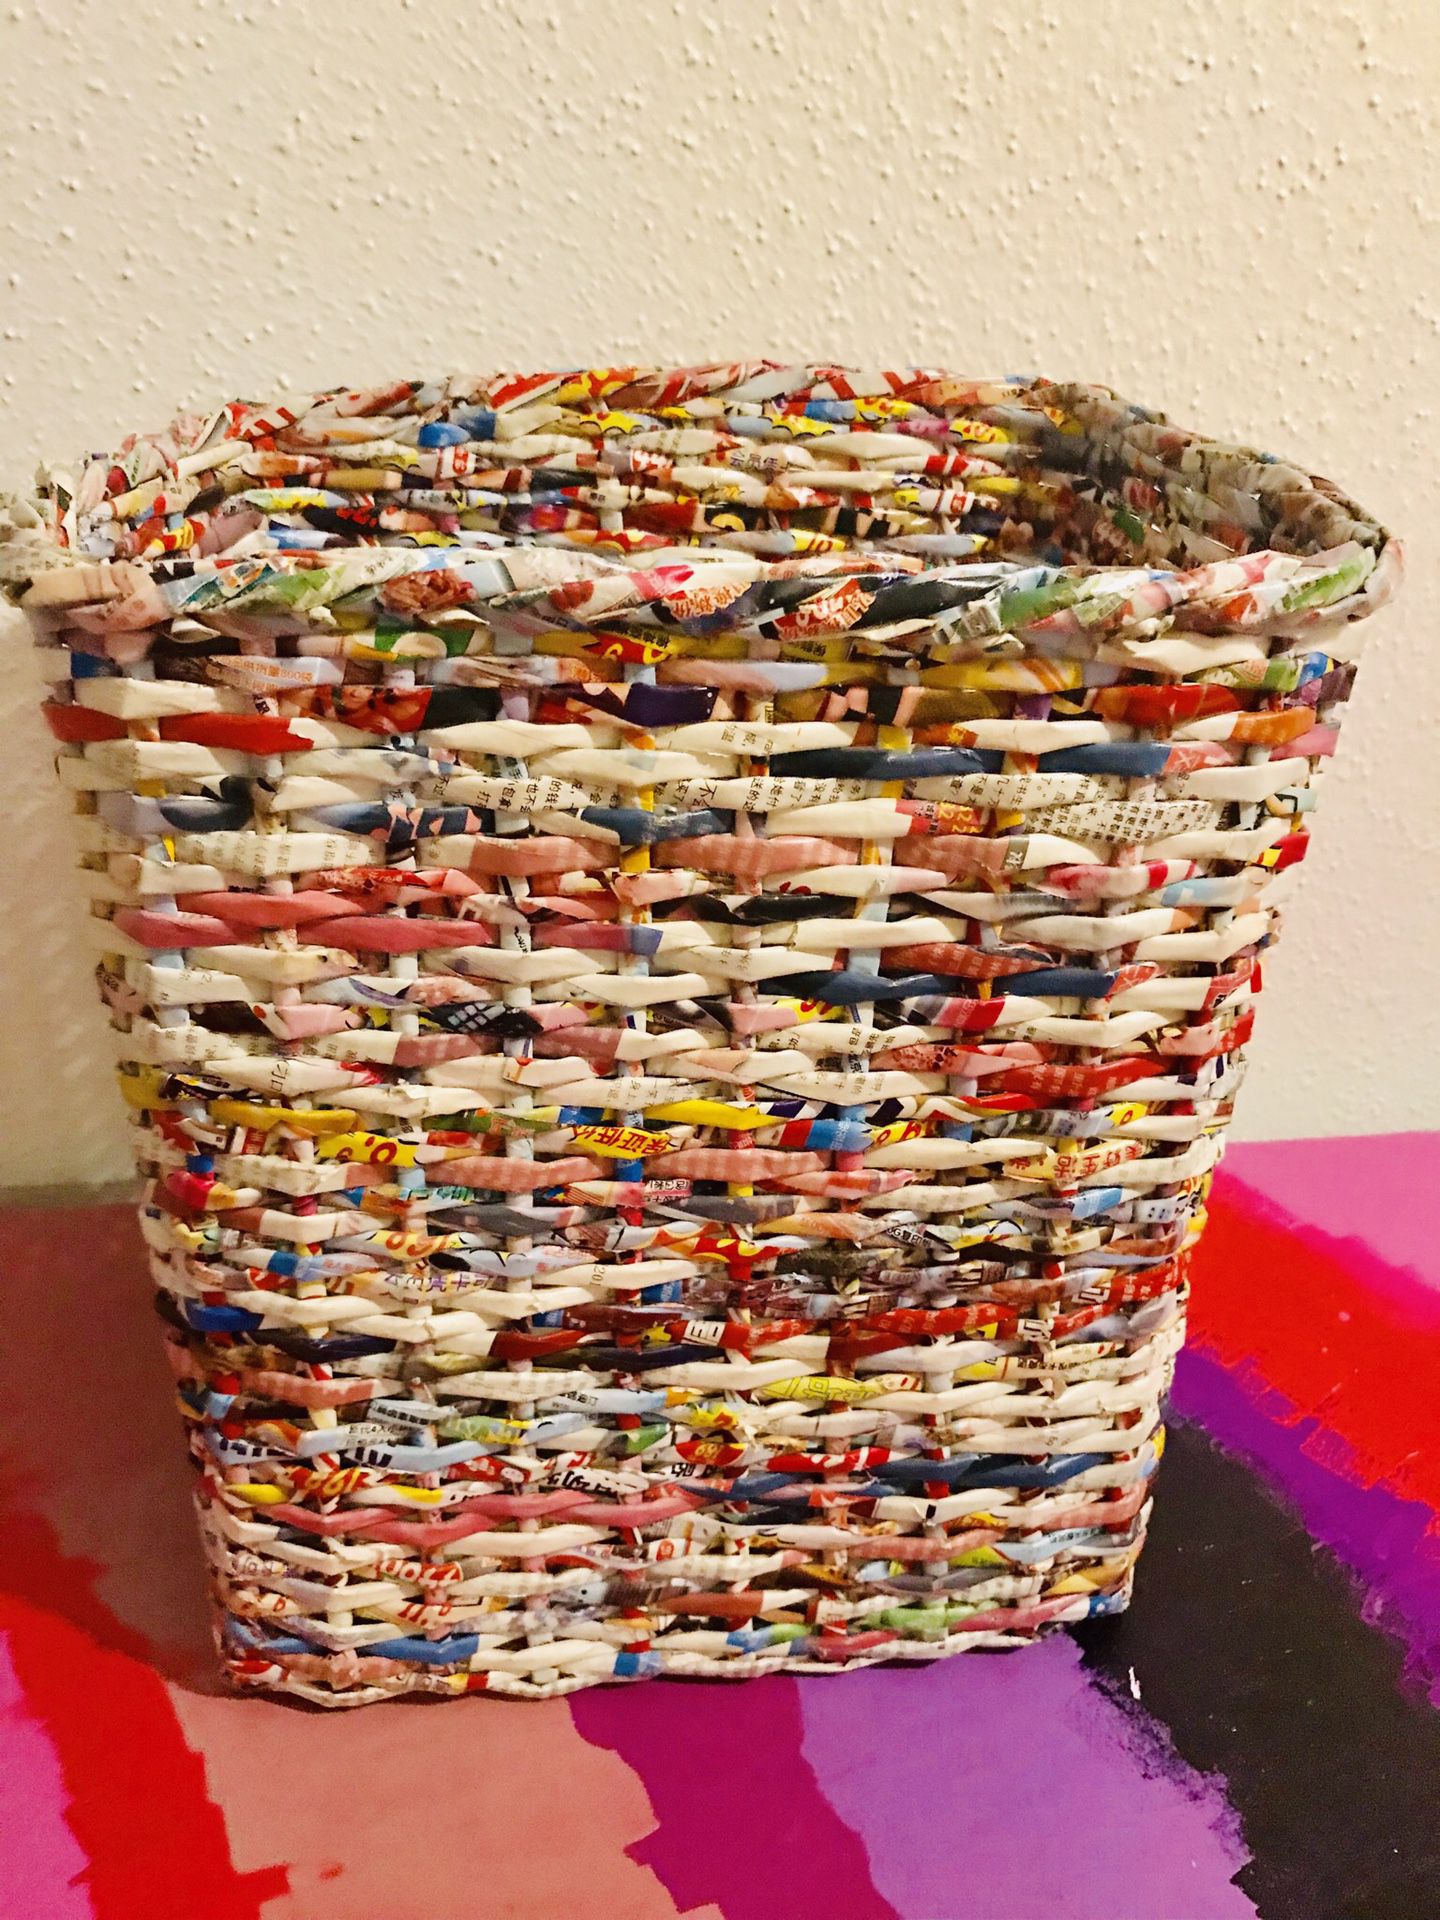 Hand Made Woven Recycled Newspaper Paper Basket Trash Can, Container / Storage Bin Medium Environmentally Friendly